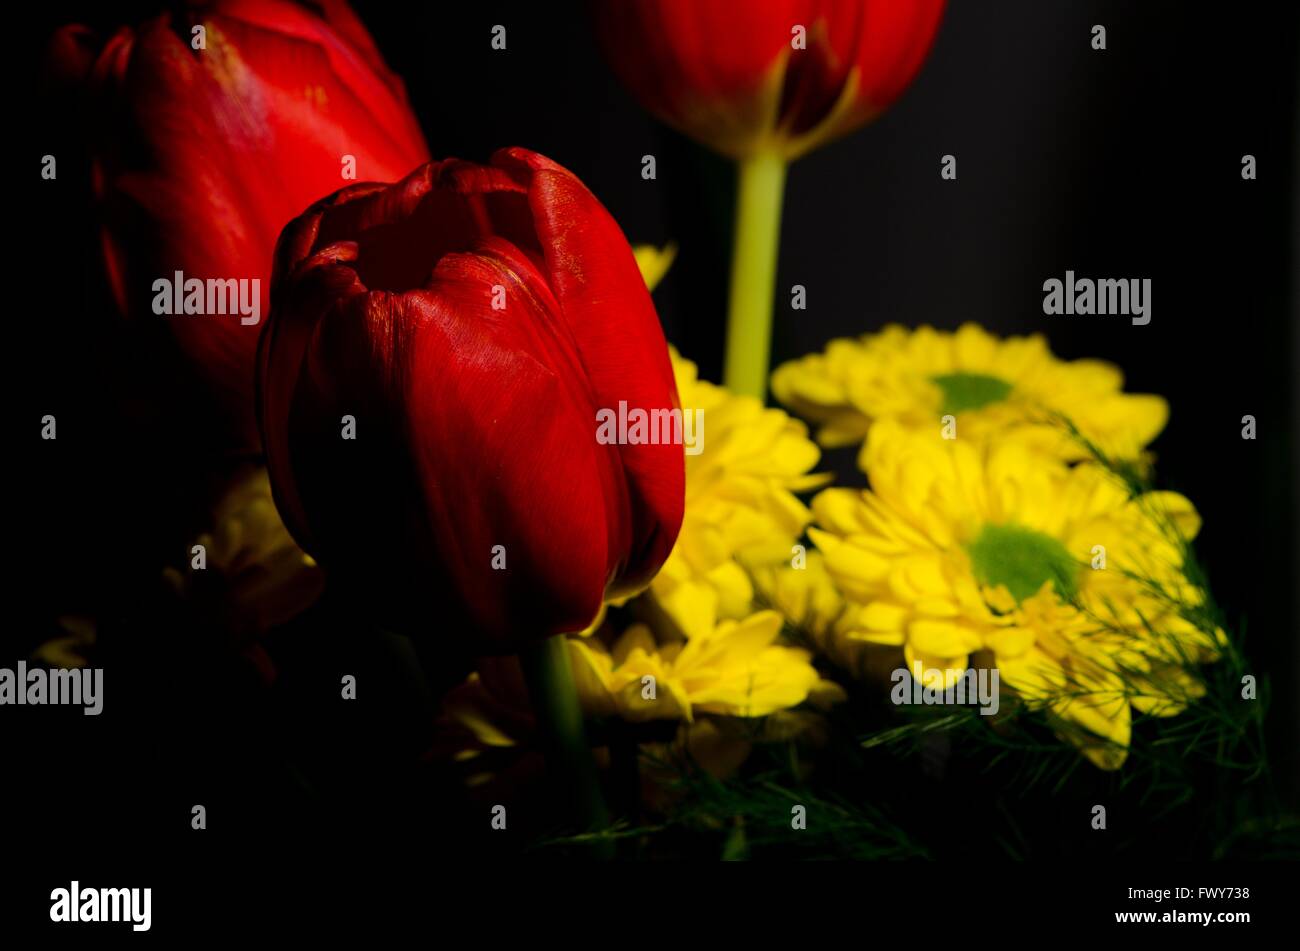 Red tulip and yellow blooms details isolated on black background Stock Photo